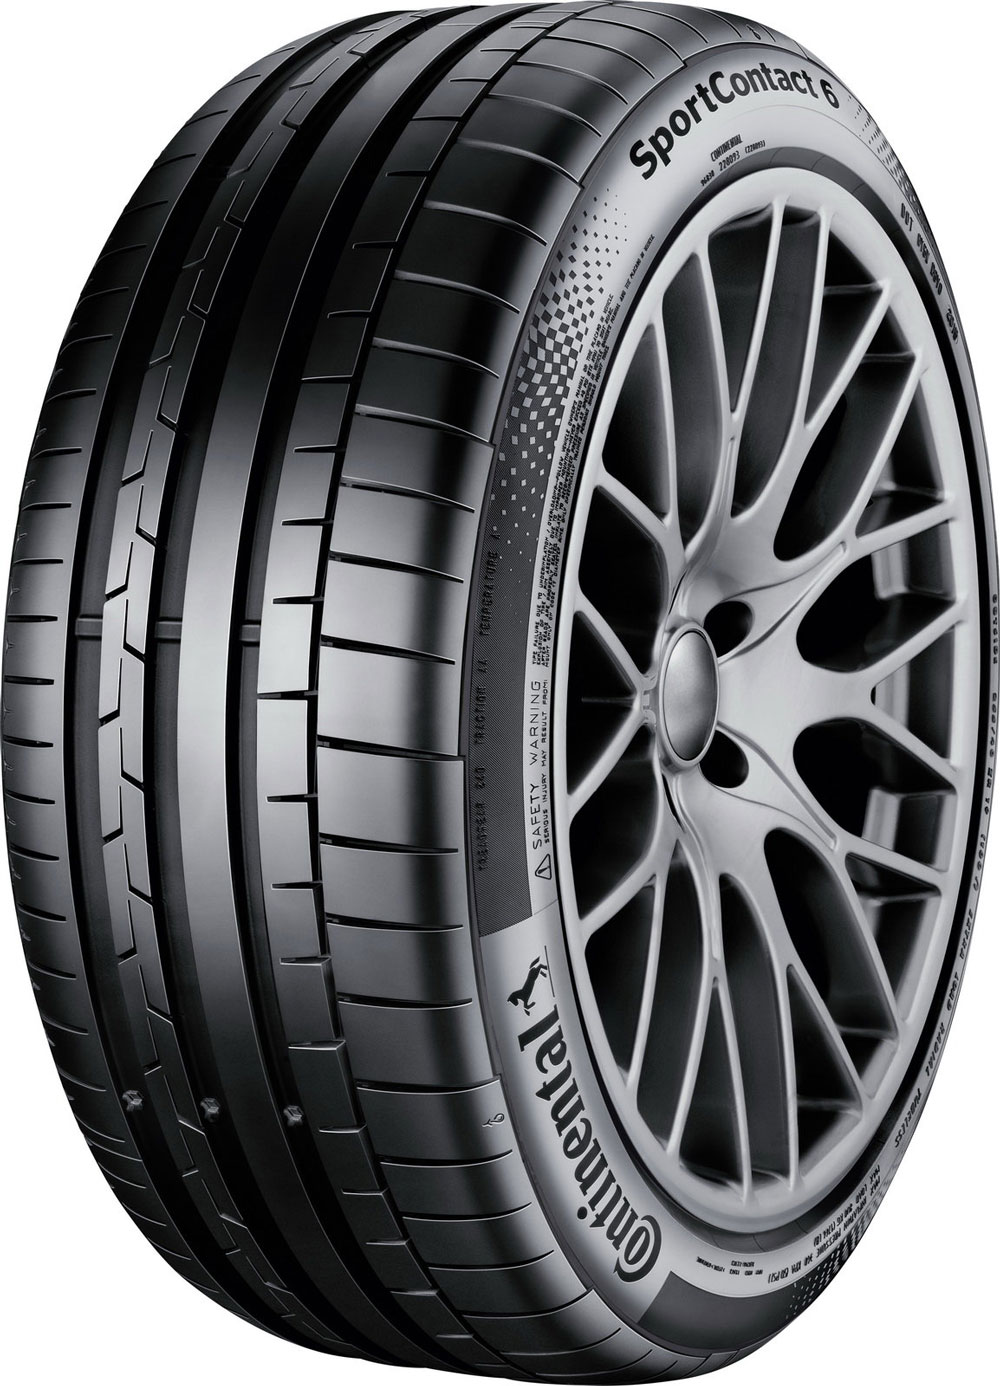 Гуми за кола CONTINENTAL SPORT CONTACT 6 XL 305/30 R19 102Y